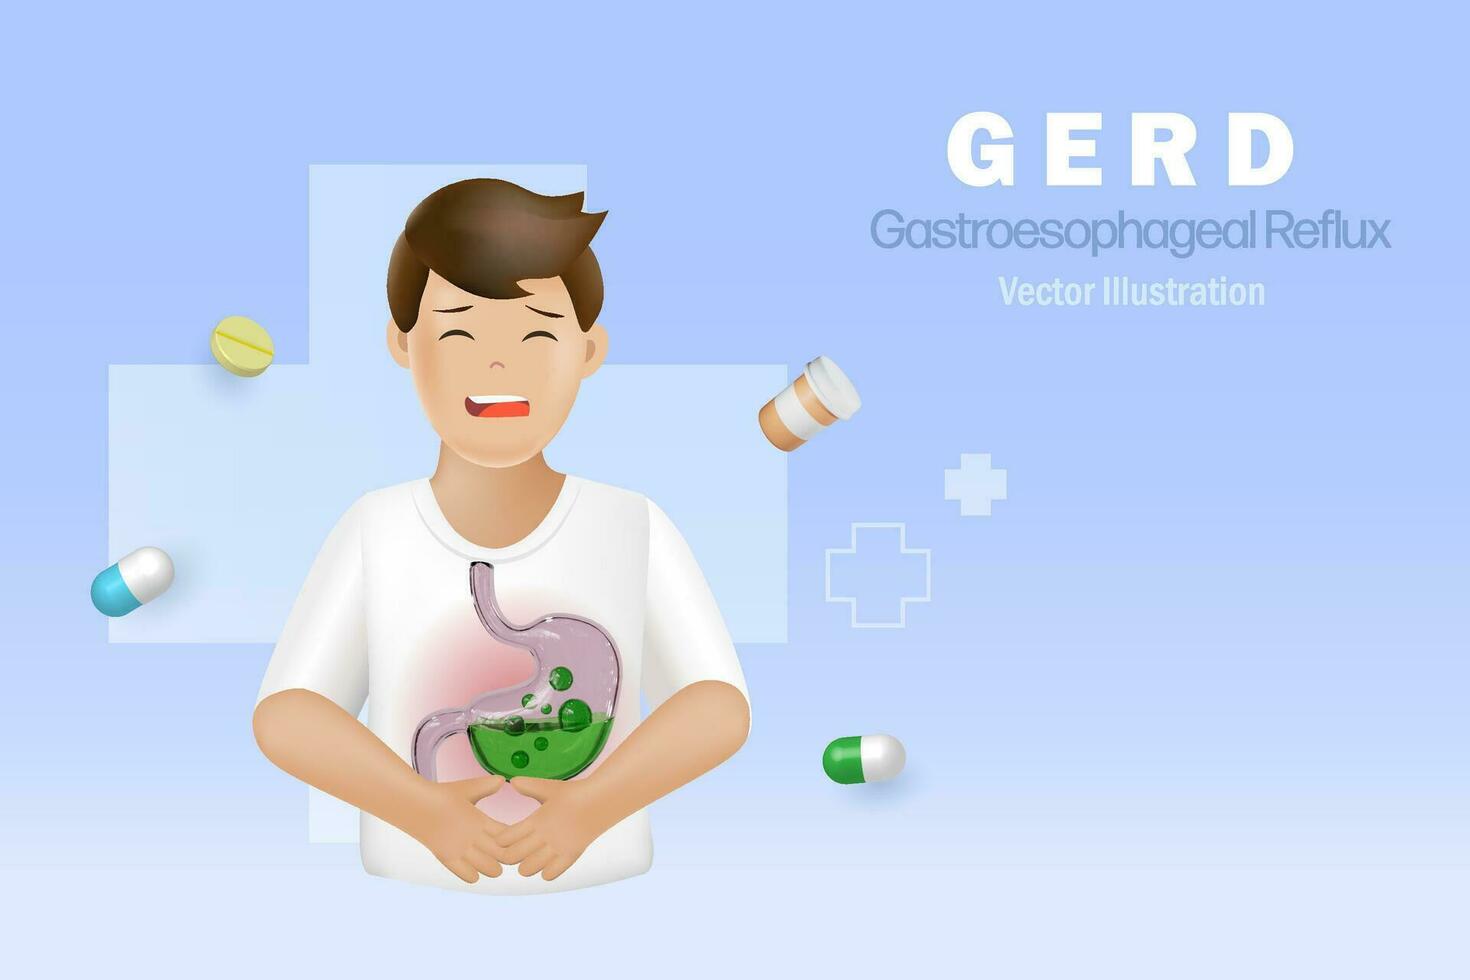 GERD gastroesophageal reflux acid on patient stomach. Digestive disorder causes patient heartburn pain or acid reflux indigestion. Medical and healthcare. 3D vector. vector